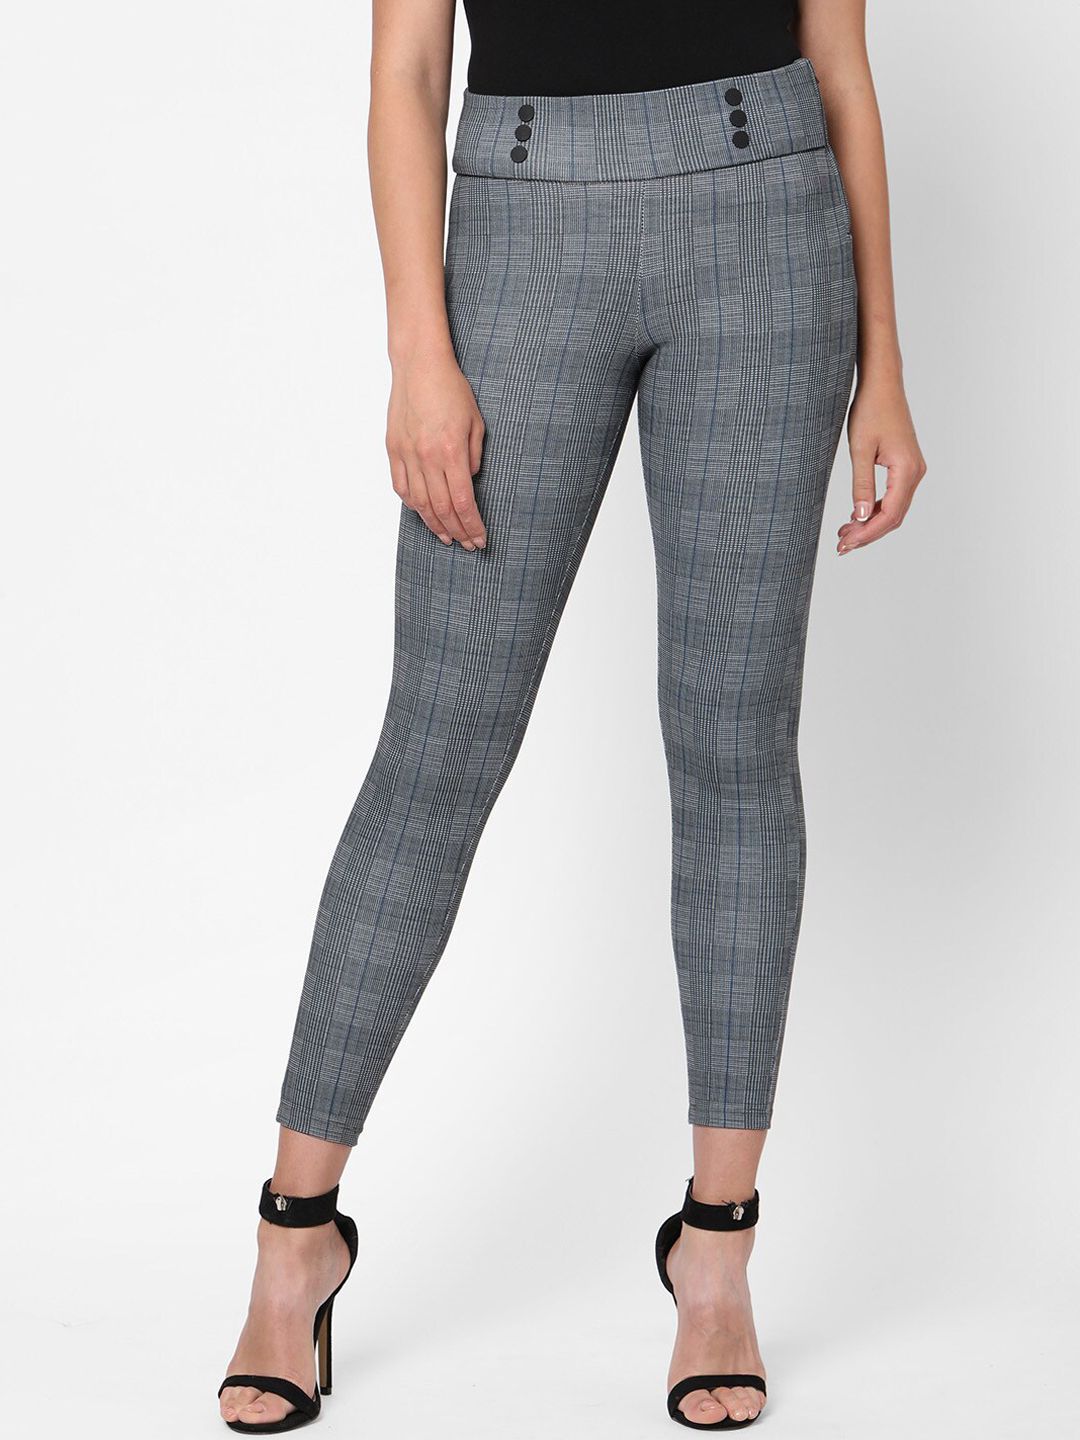 Kraus Jeans Women Grey Checked Skinny Fit High-Rise Trousers Price in India